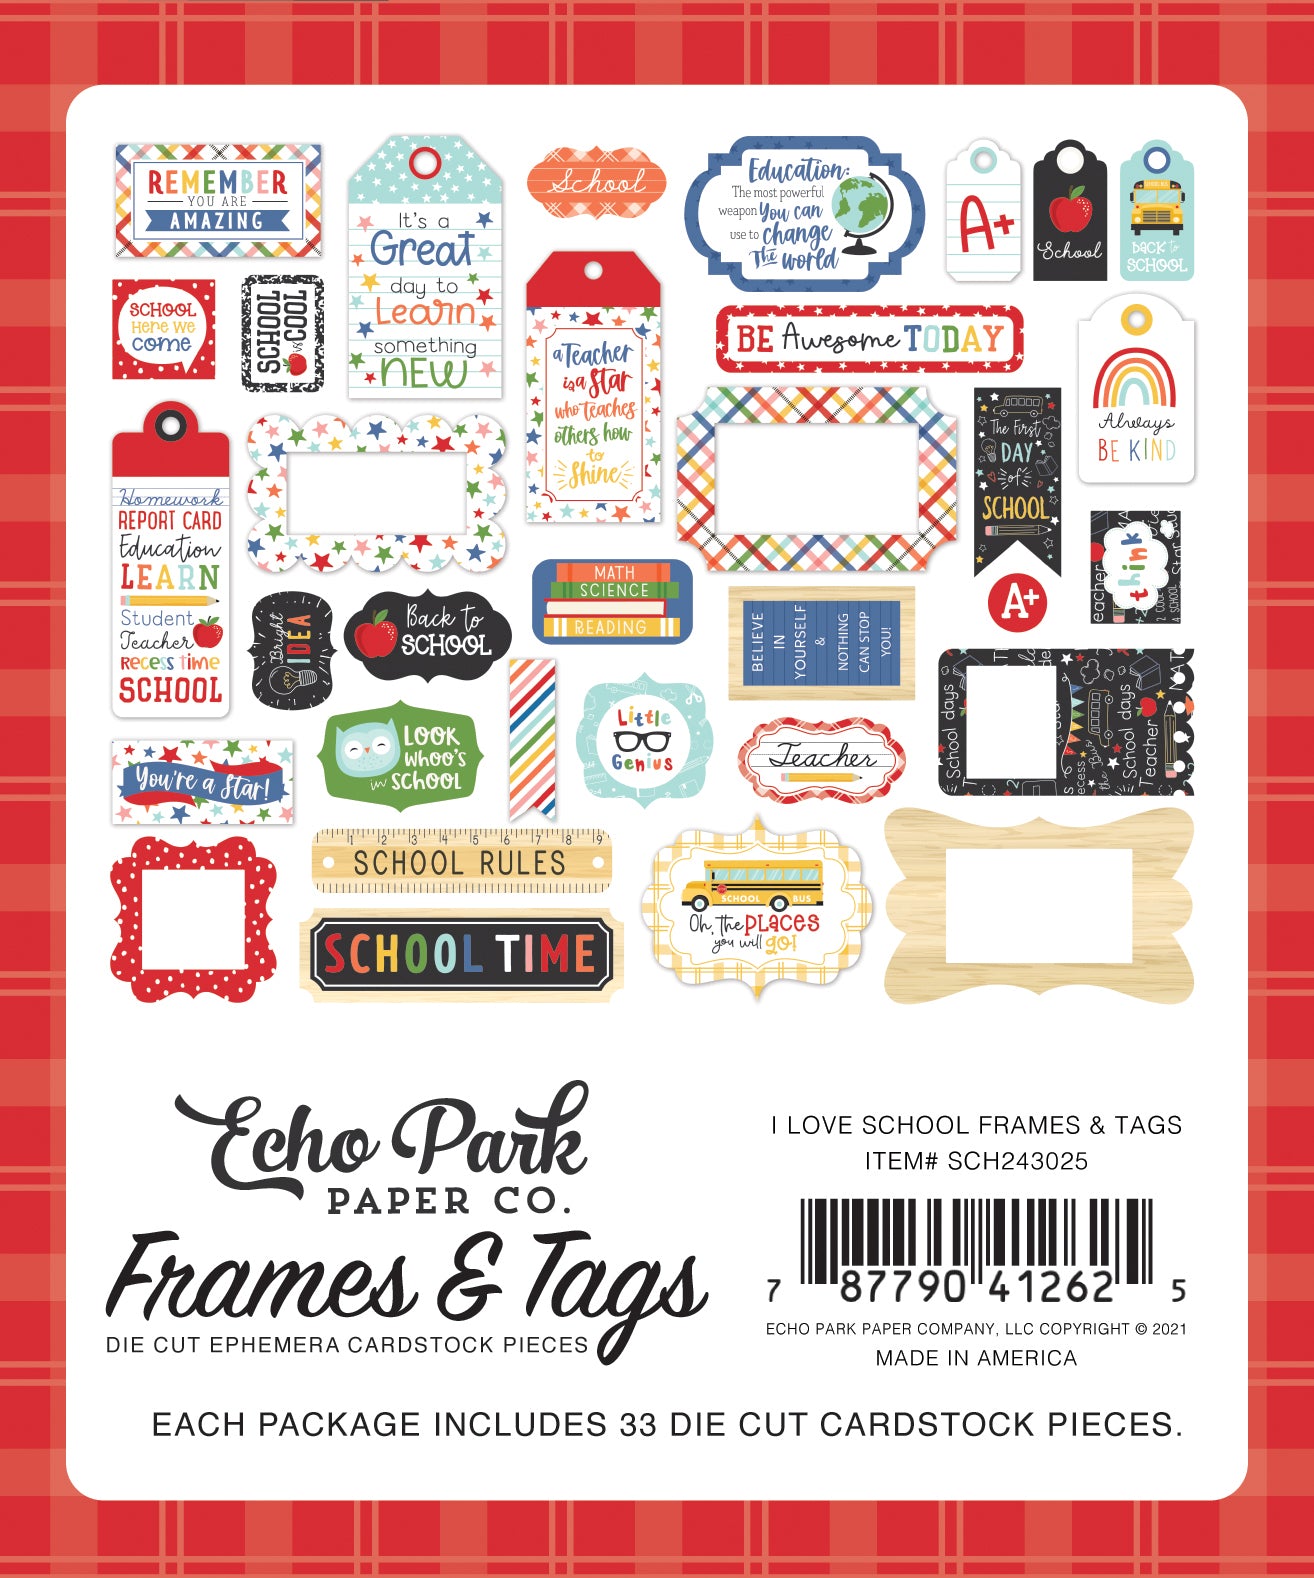 I Love School Frames & Tags Die Cut Cardstock Pack.  Pack includes 33 different die-cut shapes ready to embellish any project.